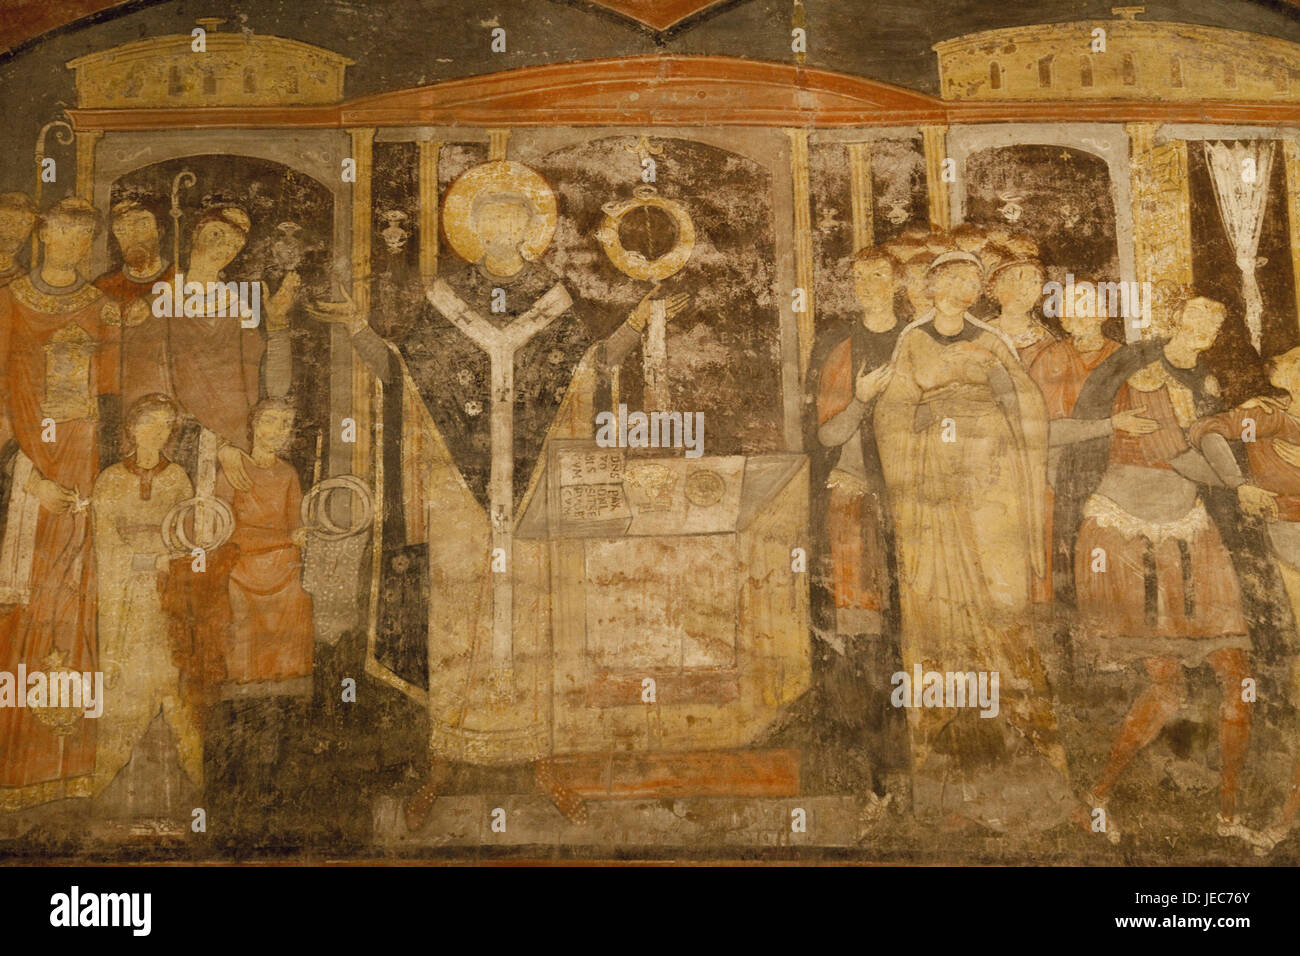 Italy, Rome, basilica San Clemente, frescoes from the 9th century, representation of the life of Christ, Stock Photo